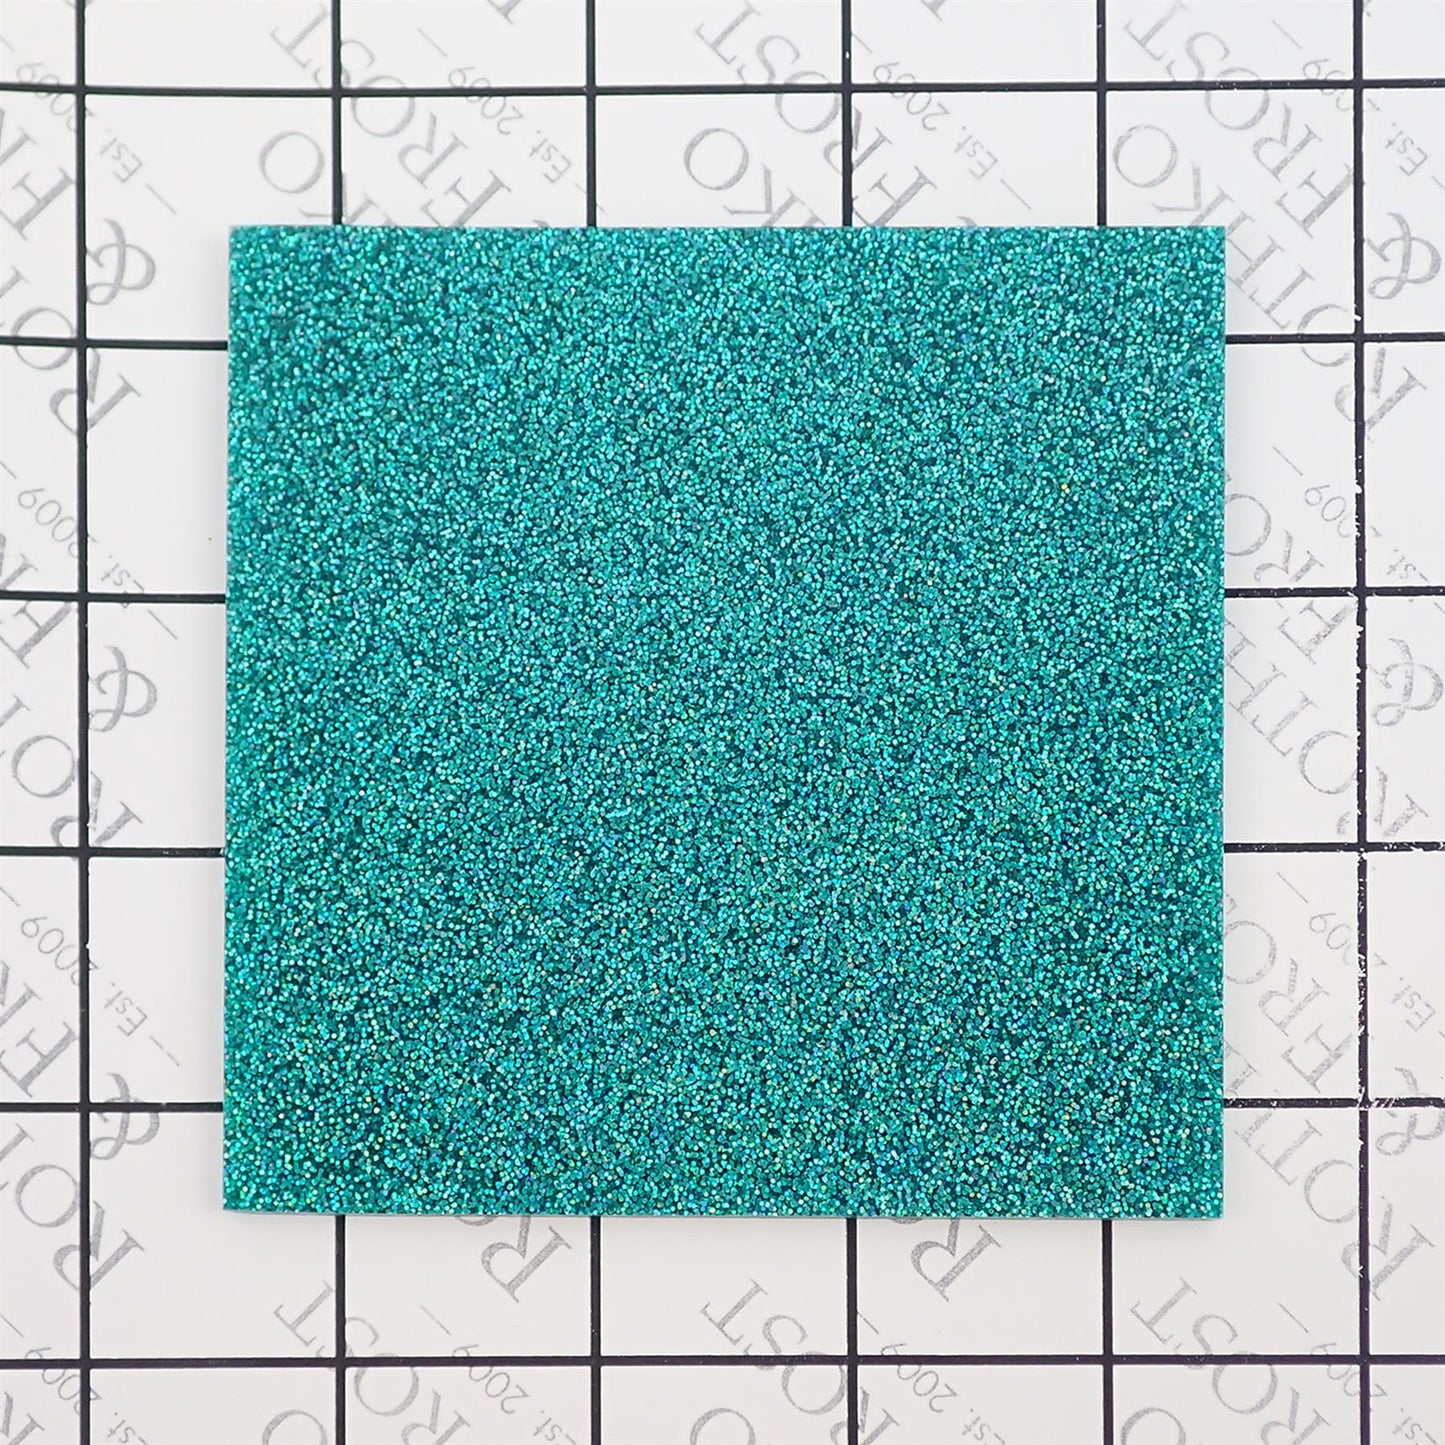 Incudo Emerald Green 2-Sided Holographic Glitter Acrylic Sheet - 98x98x3mm (3.9x3.86x0.12"), Sample